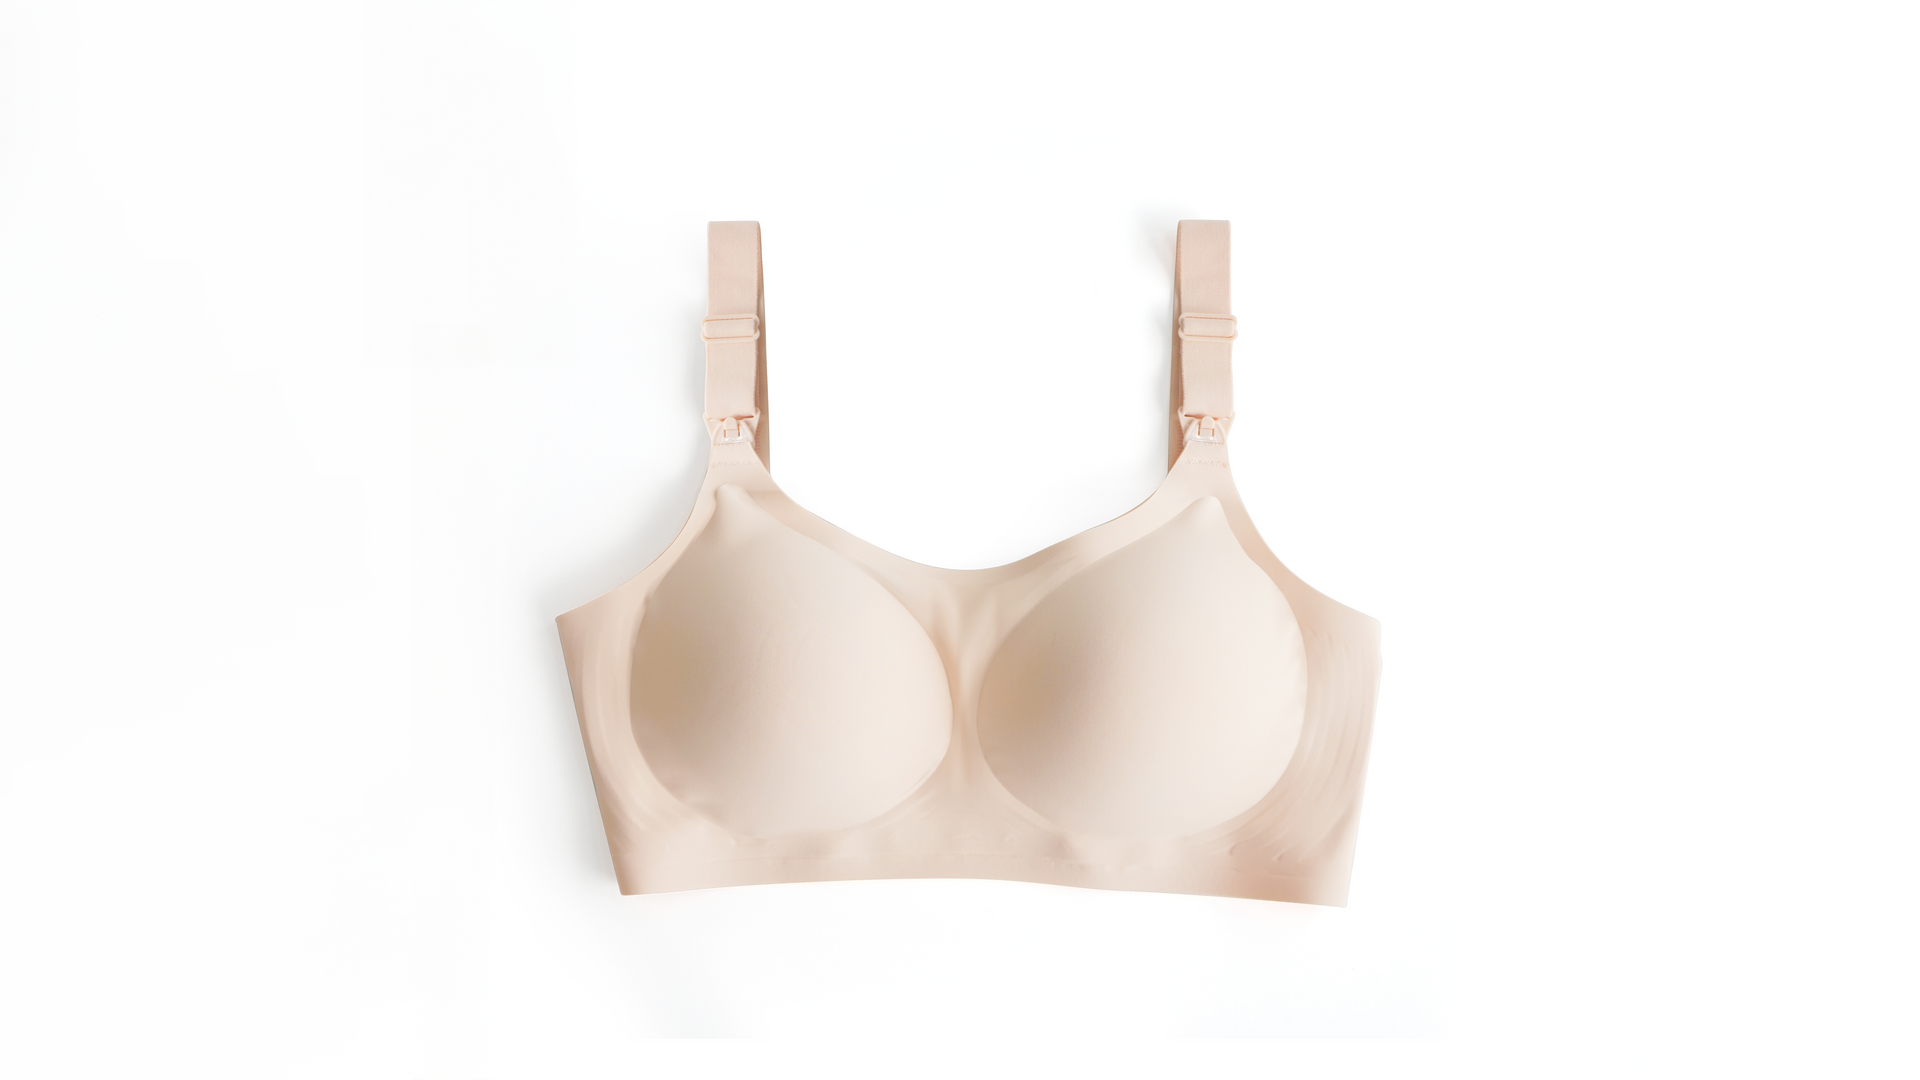 Buy Nude Clear Bra Straps from Next Ireland